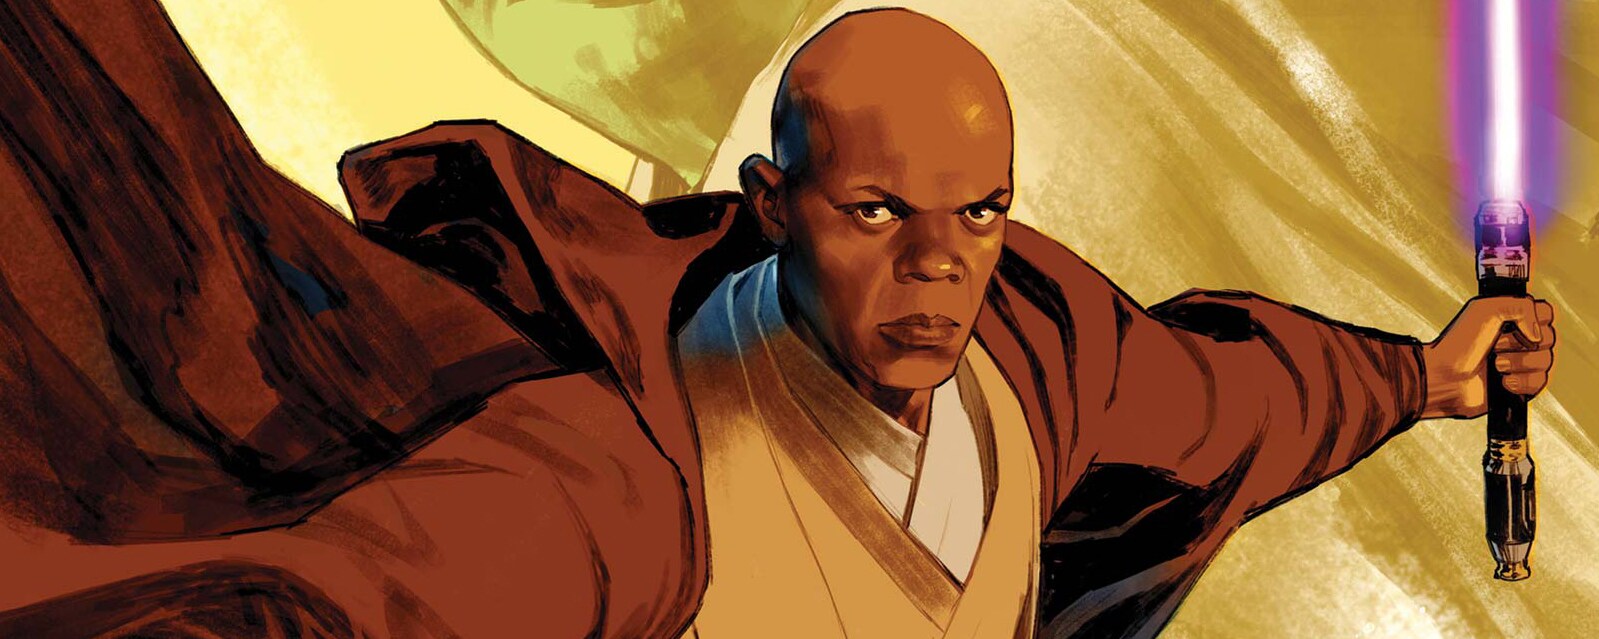 Marvel’s Mace Windu #1 variant cover featuring Mace with lightsaber